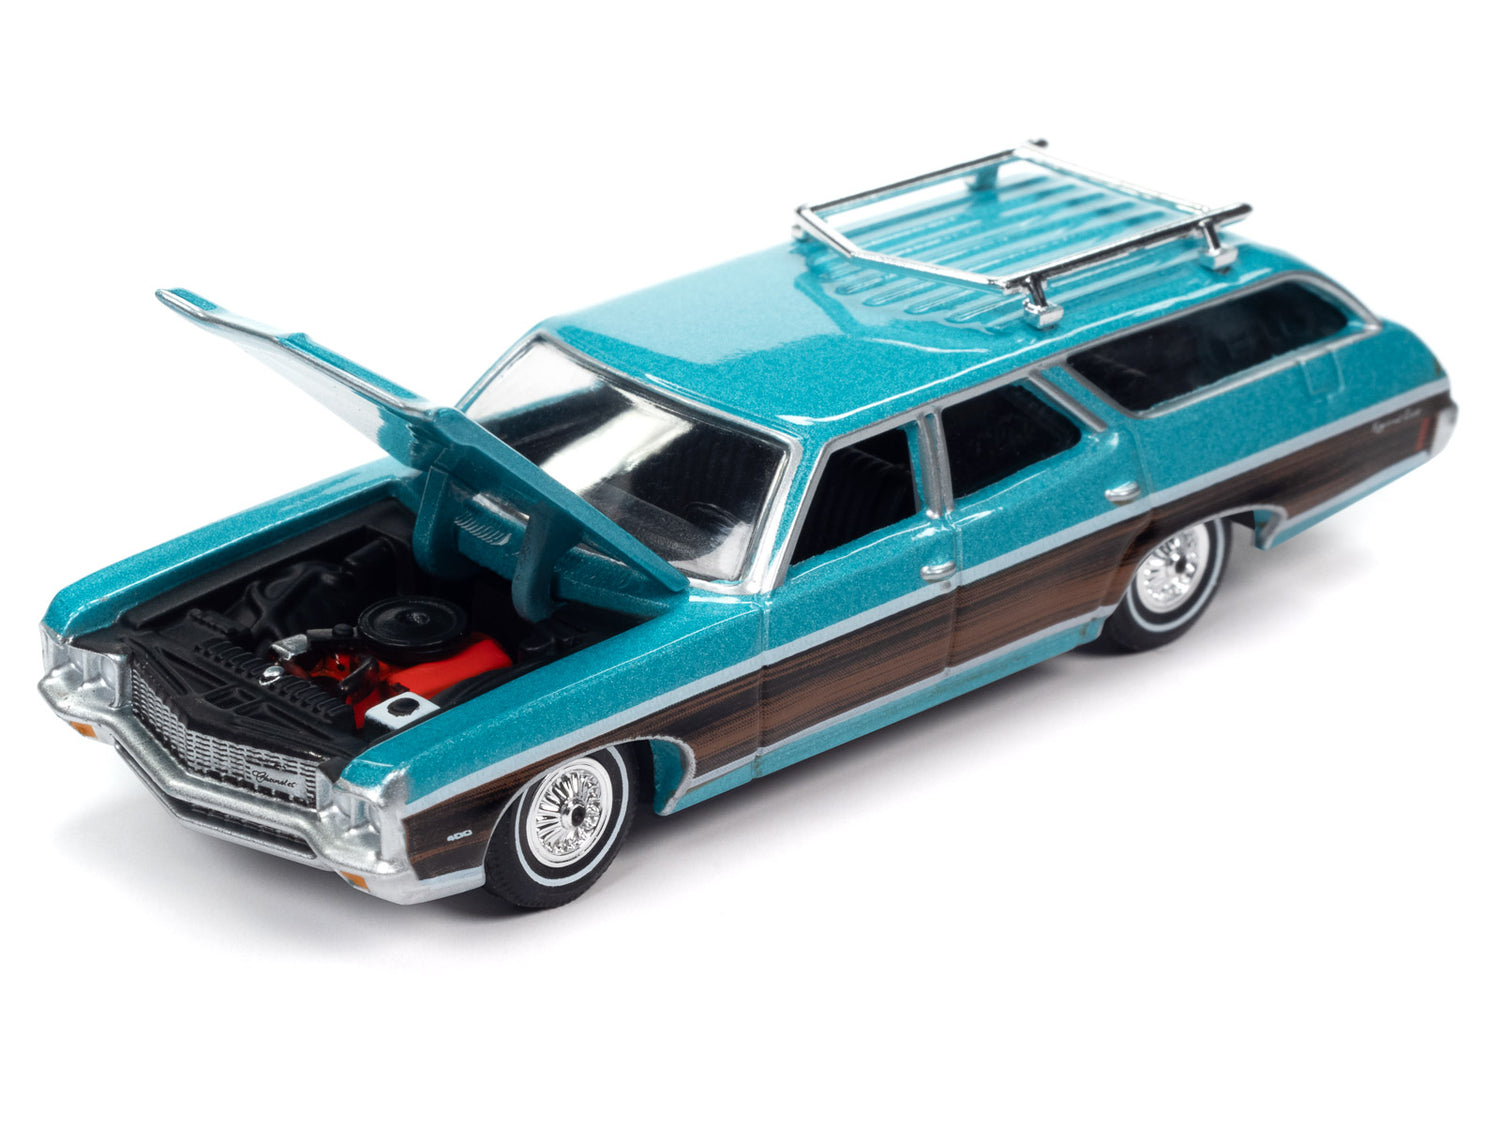 Auto World 1970 Chevrolet Kingswood Estate (Misty Turquoise Poly w/Side Woodgrain) 1:64 Diecast